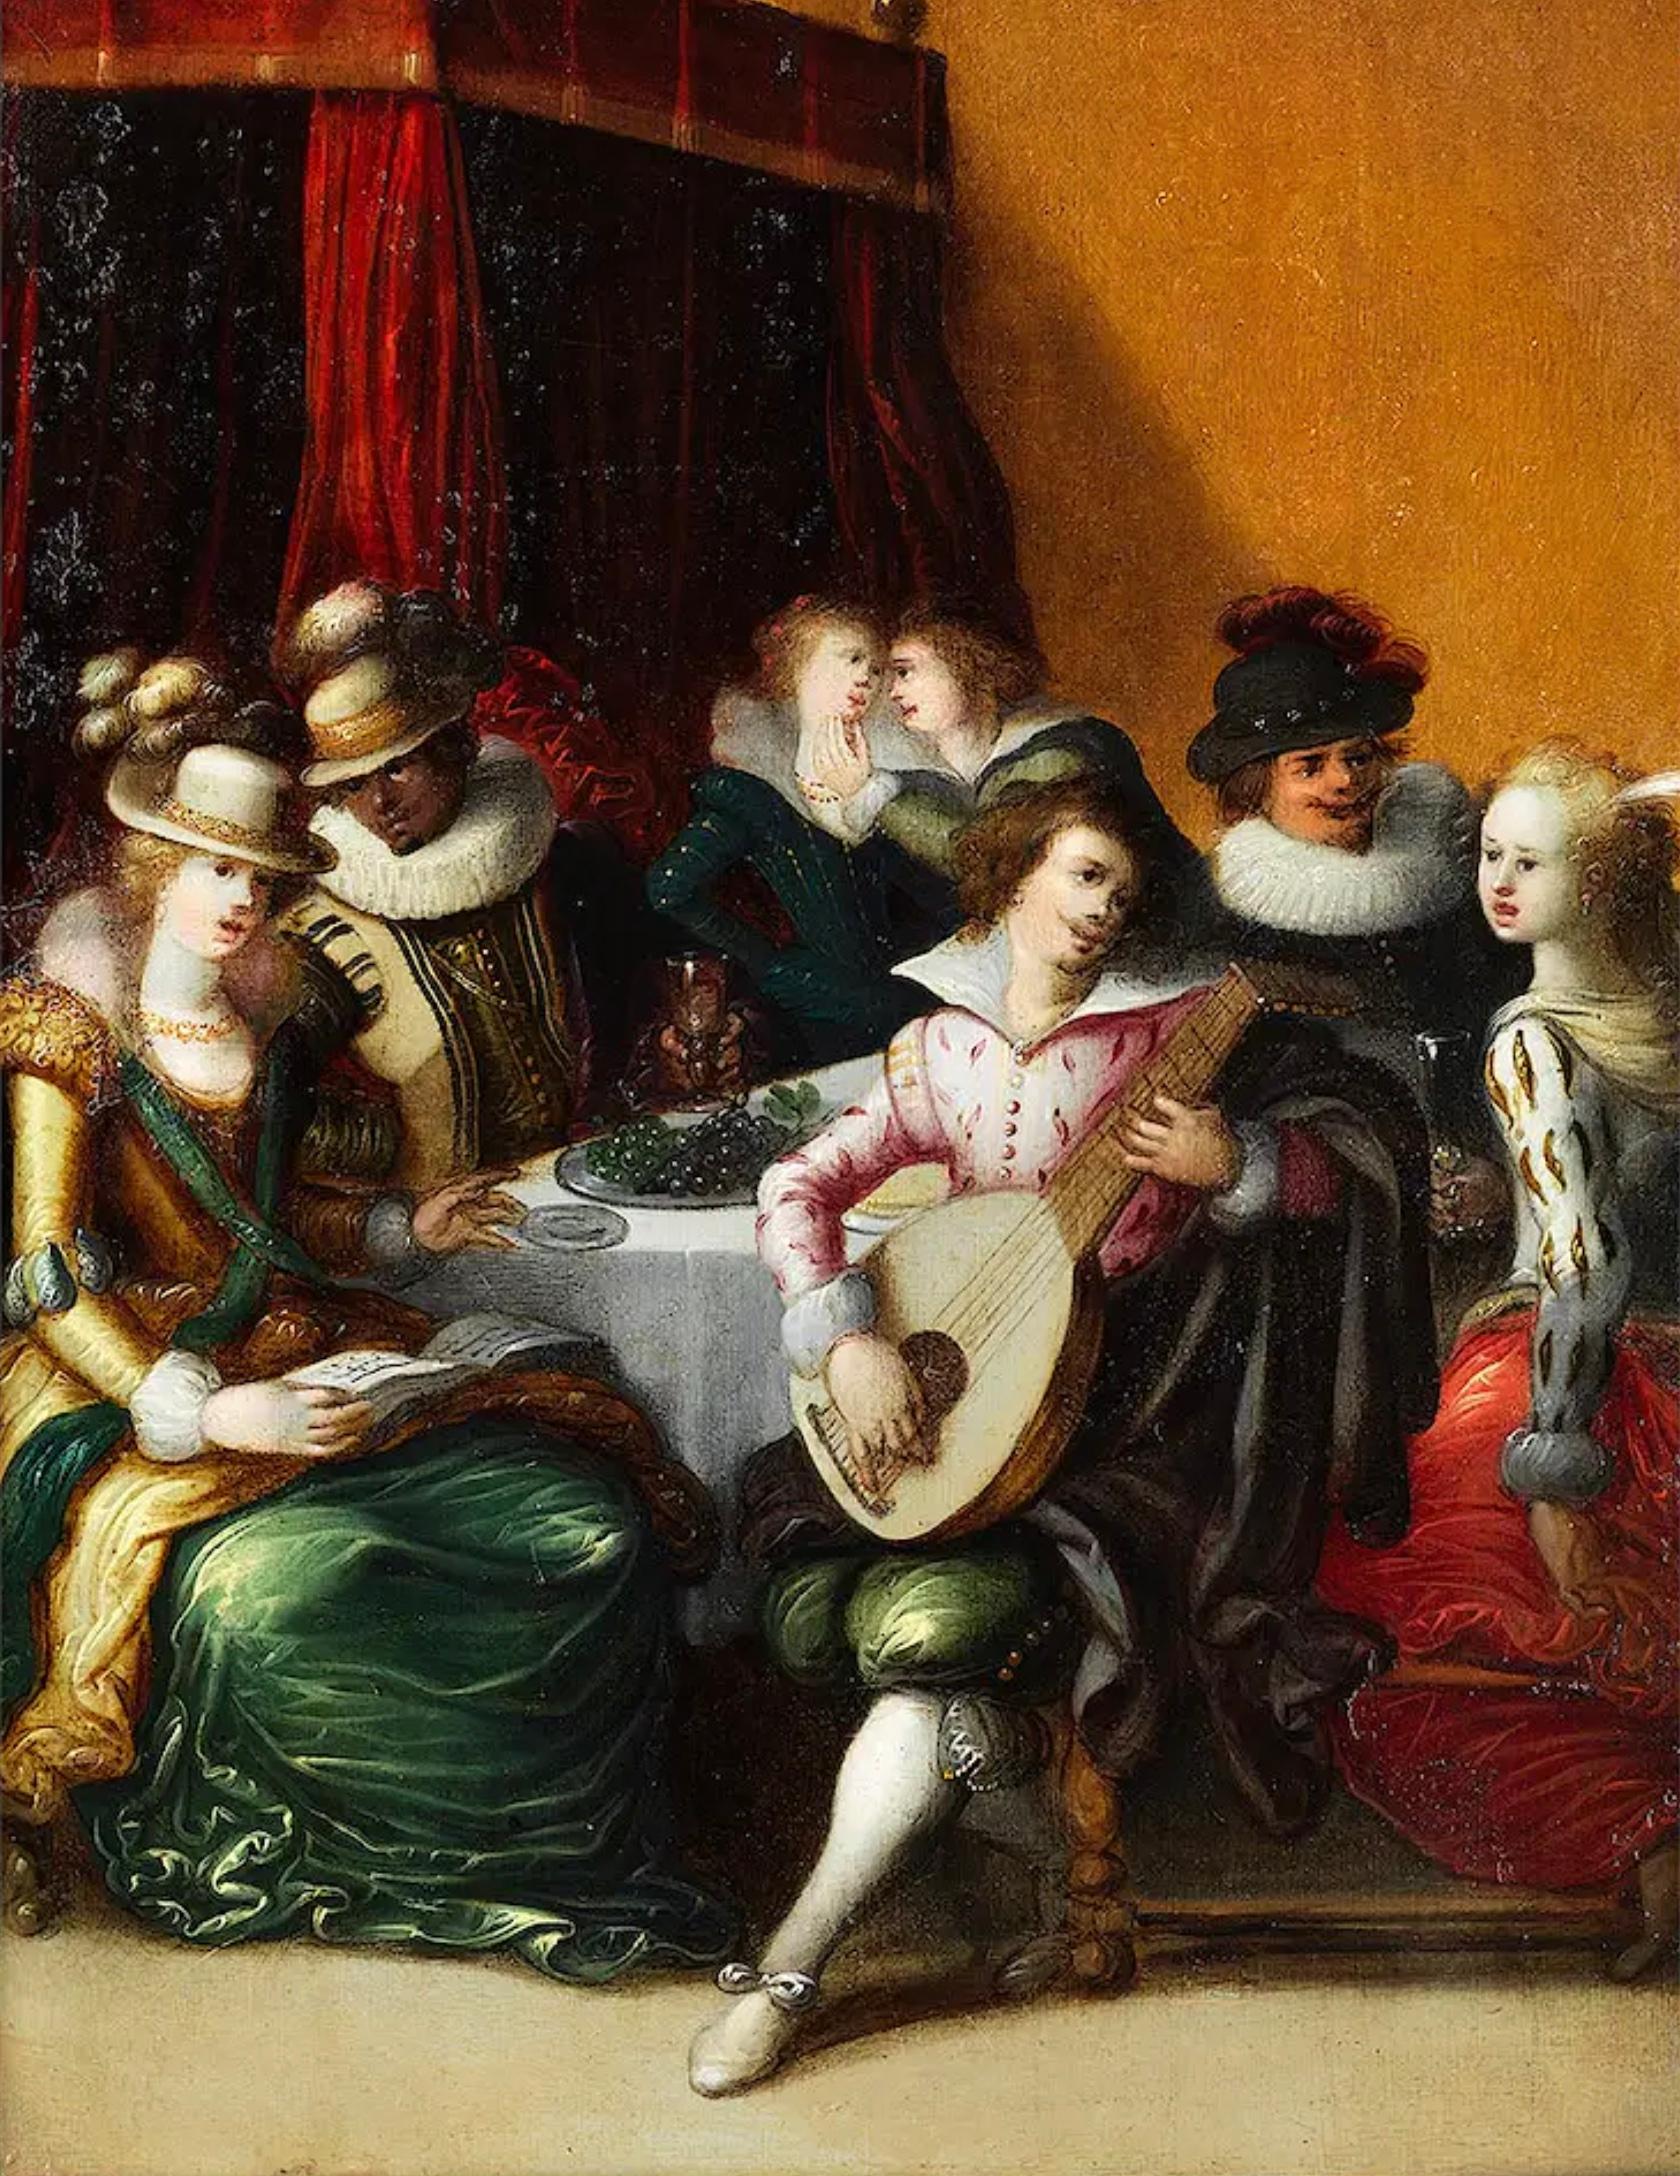 Oil on copper 

In this scene we can see an elegant company, playing music in an interior. At the centre we can see a man in lavish clothing, performing a musical piece on his lute. His fingers move deftly across the instrument. 
Several other